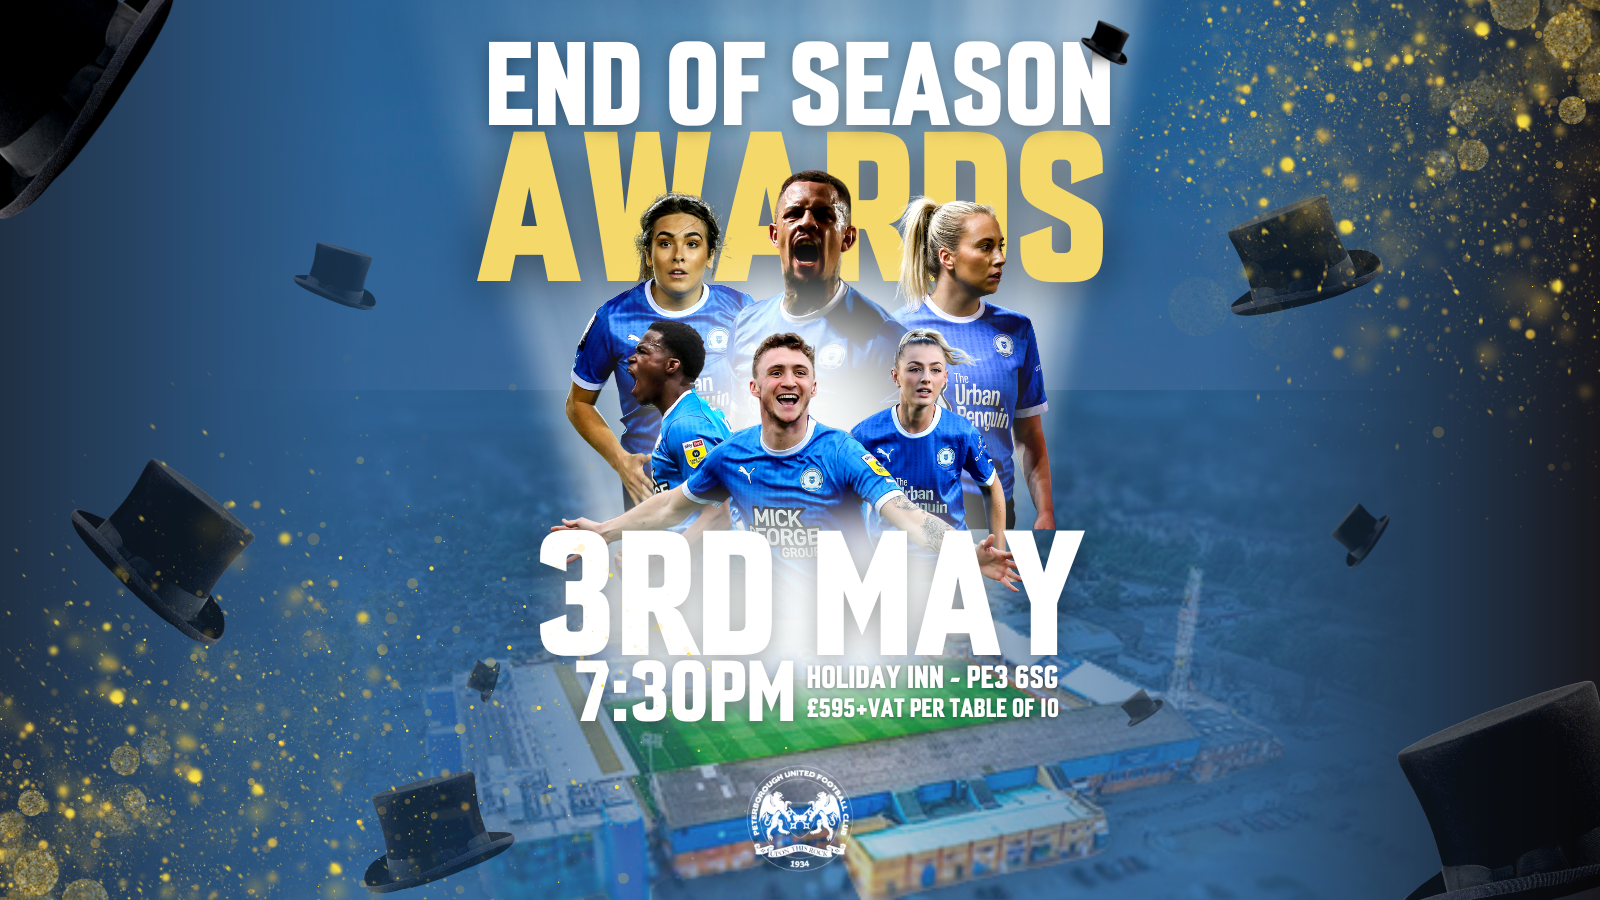 END OF SEASON AWARDS UPDATED